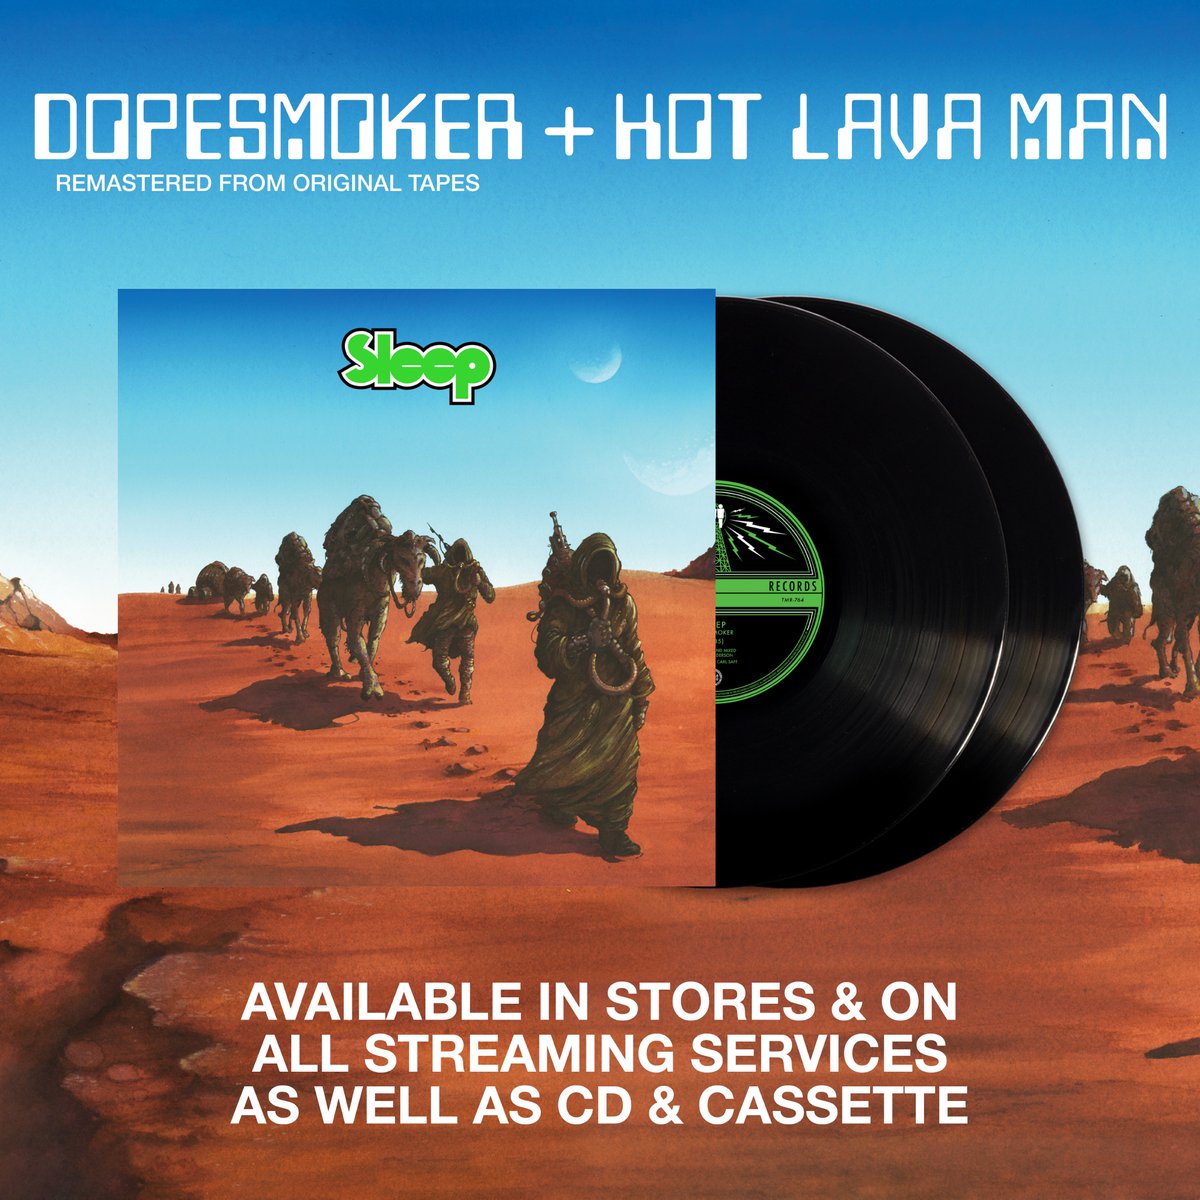 SLEEP - Dopesmoker DLP.Cassette.CD | Third Man Records Dopesmoker was remastered from original tapes, and includes HOT LAVA MAN, an unearthed studio version of this long-lost Sleep song, recorded at Razor’s Edge Studio in San Francisco in 1992. Available now.